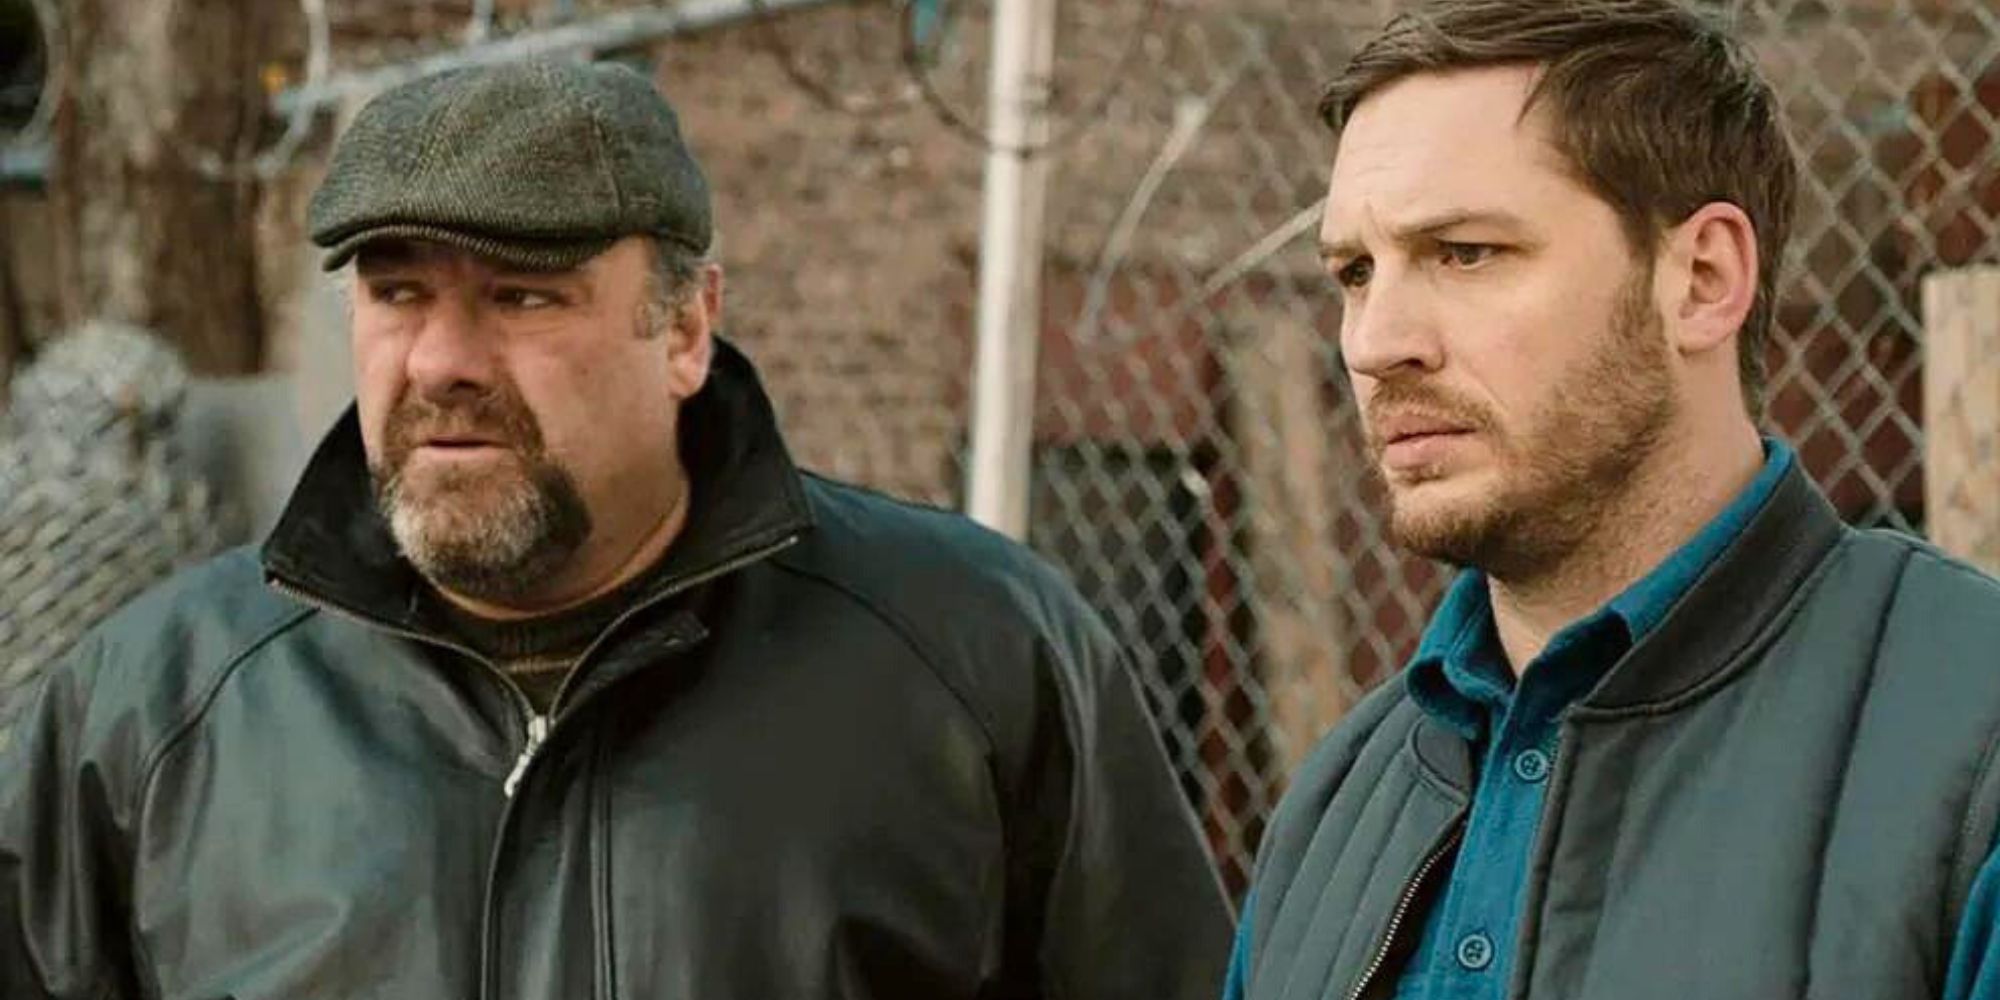 James Gandolfini as Marv standing next to Tom Hardy as Bob in front of a chain fence in The Drop (2014)